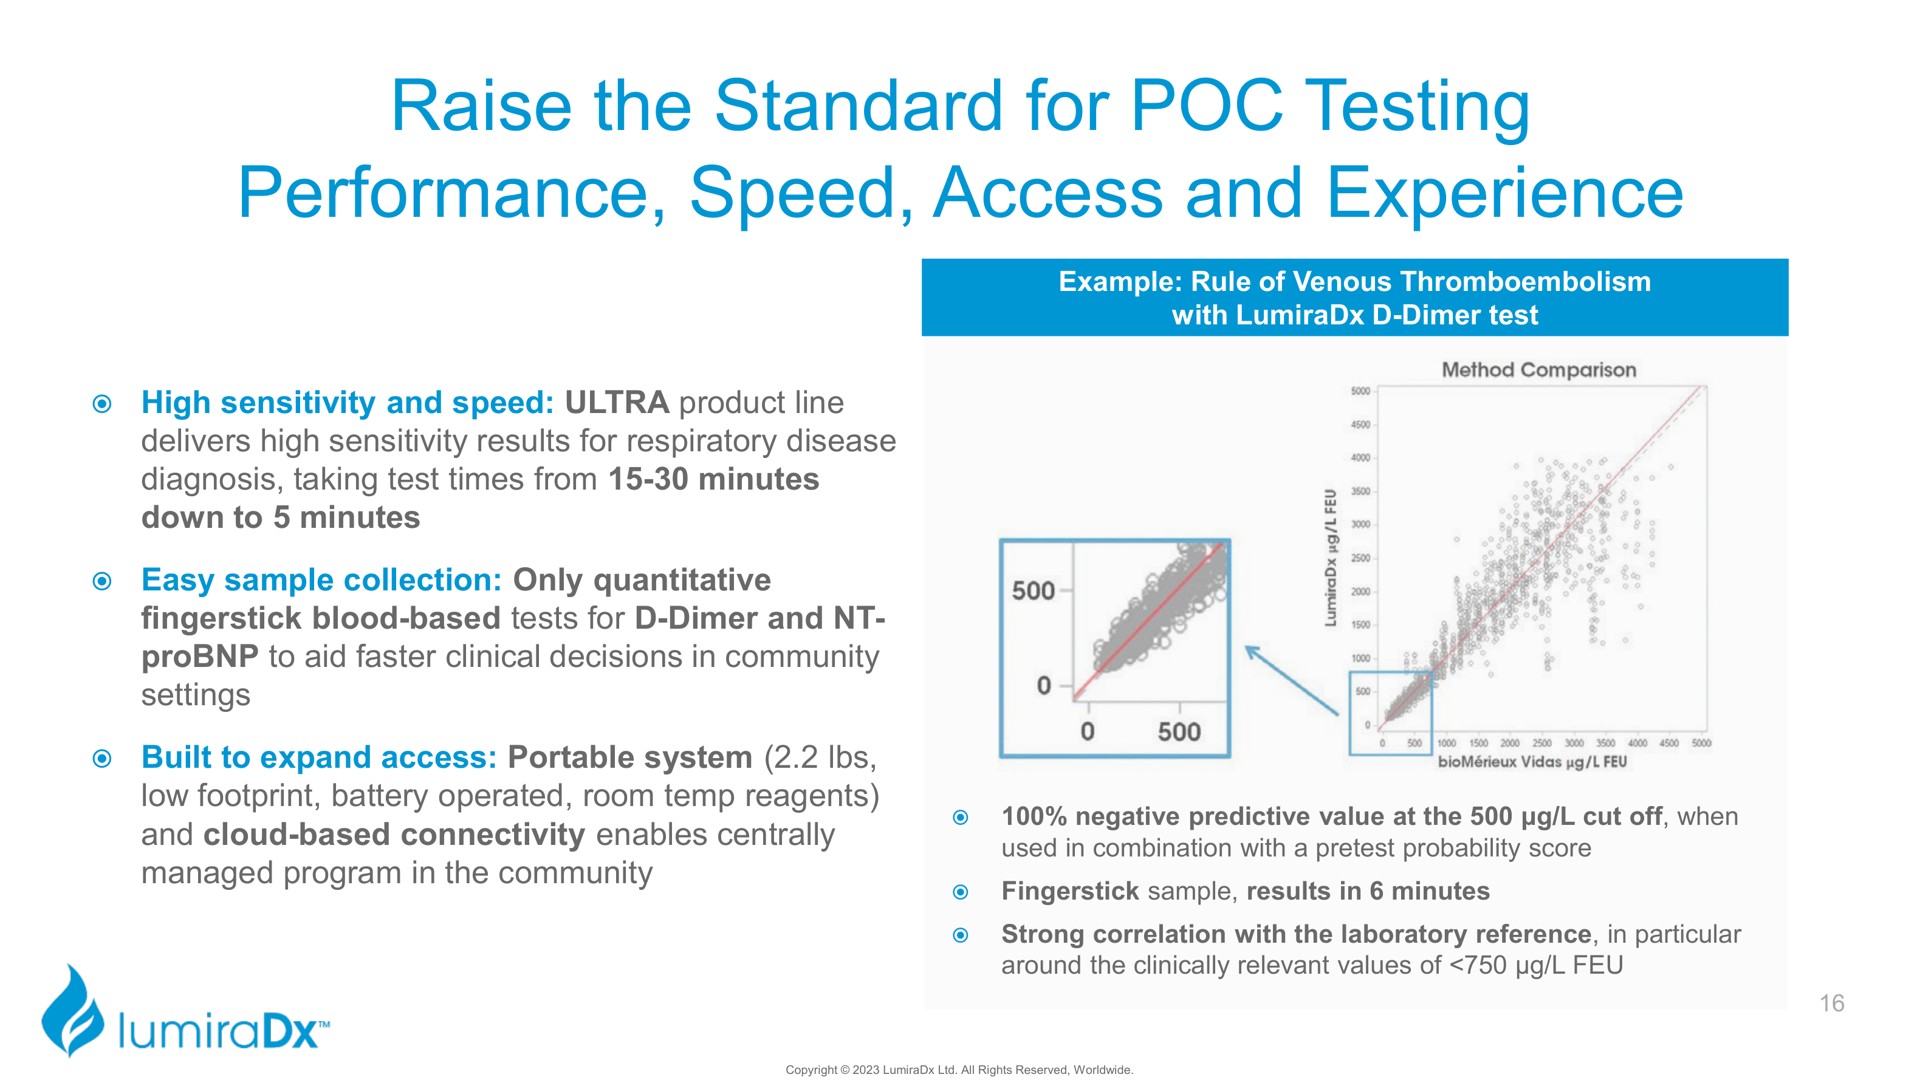 raise the standard for testing performance speed access and experience | LumiraDx